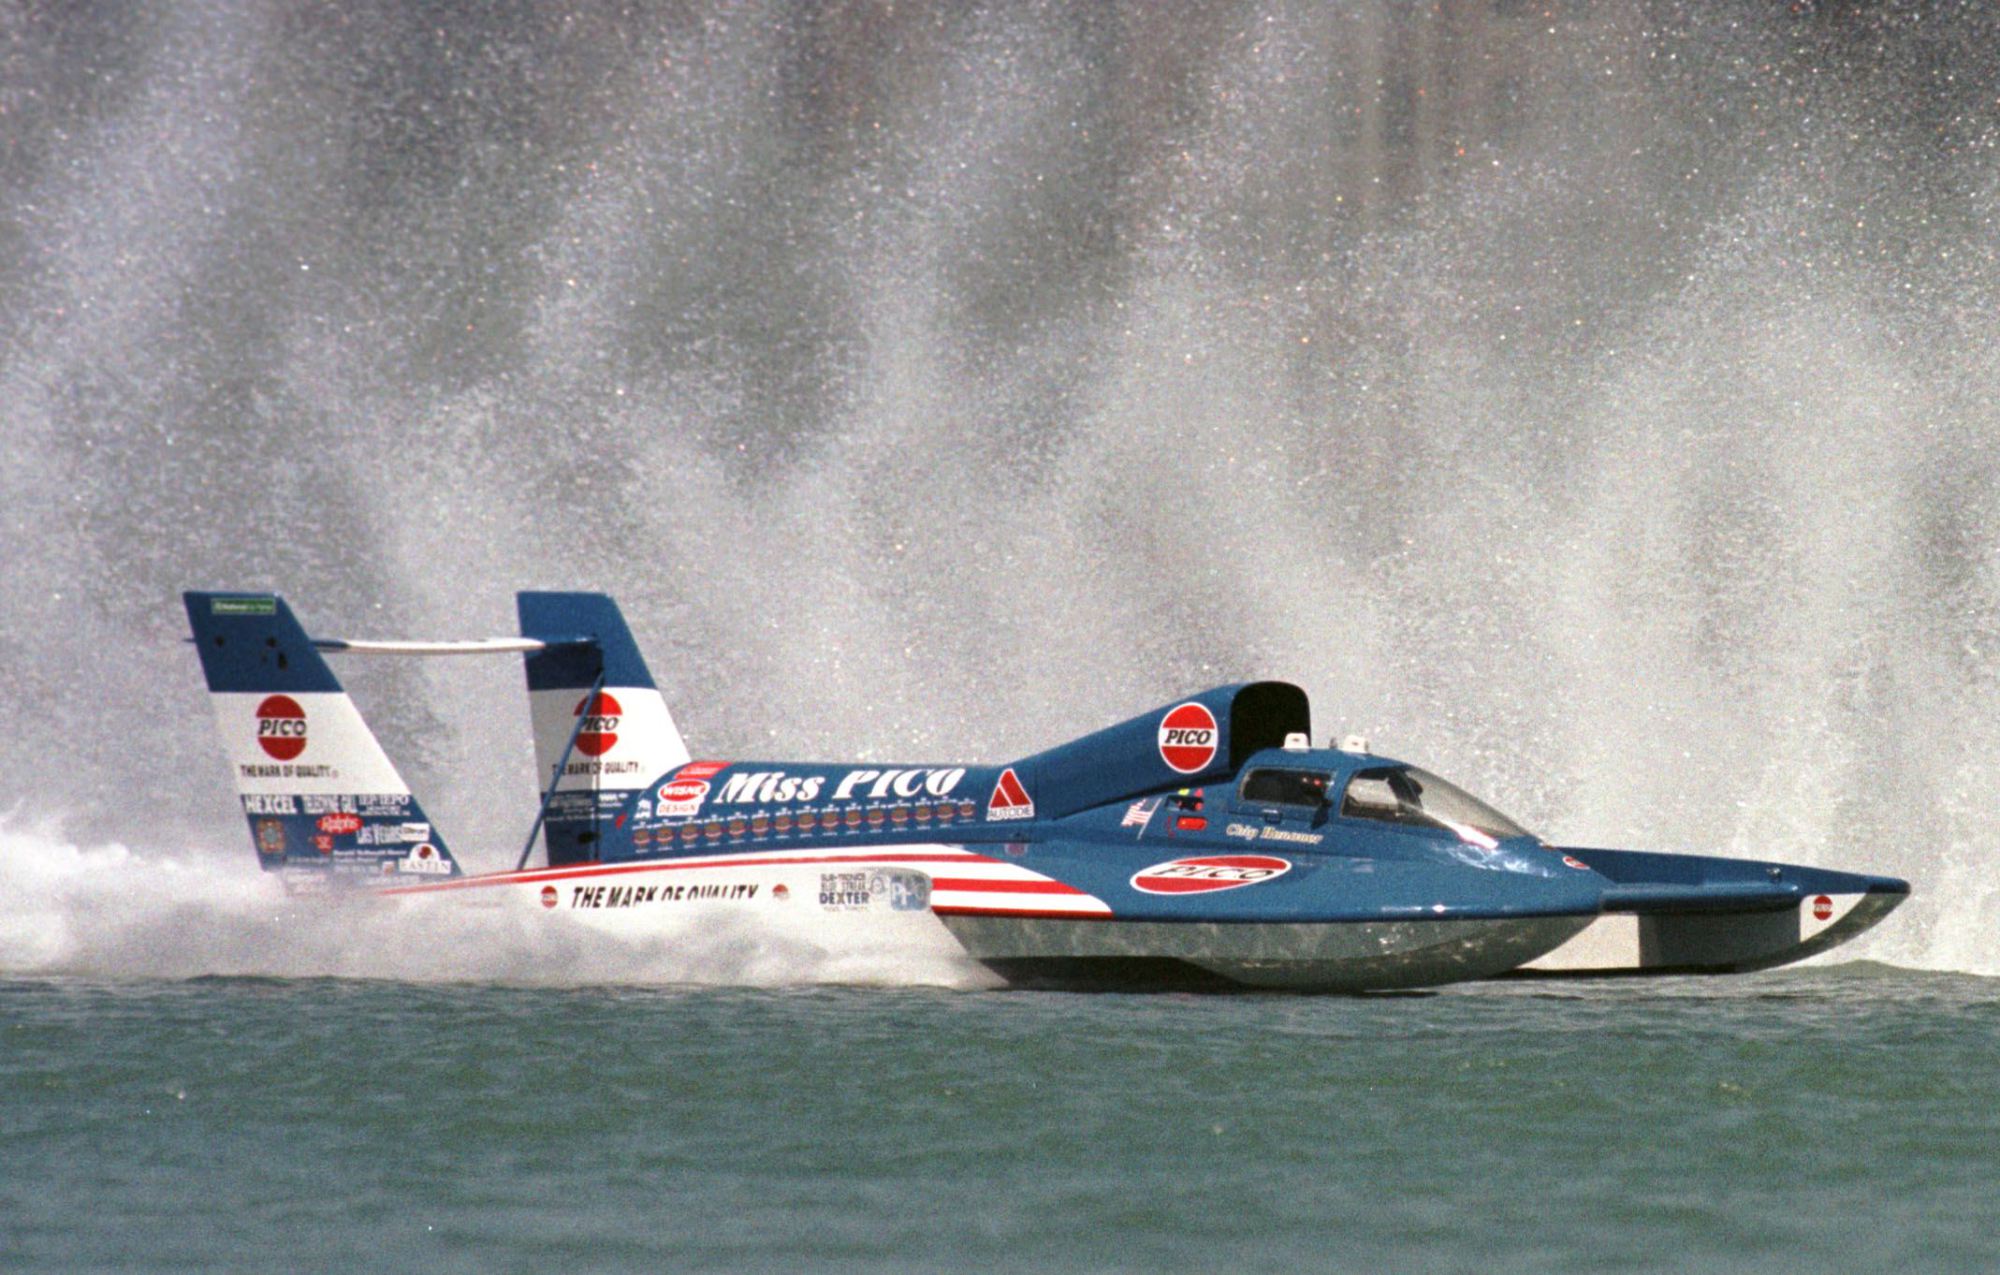 unlimited hydroplane, Race, Racing, Jet, Hydroplane, Boat, Ship, Hot, Rod, Rods Wallpaper